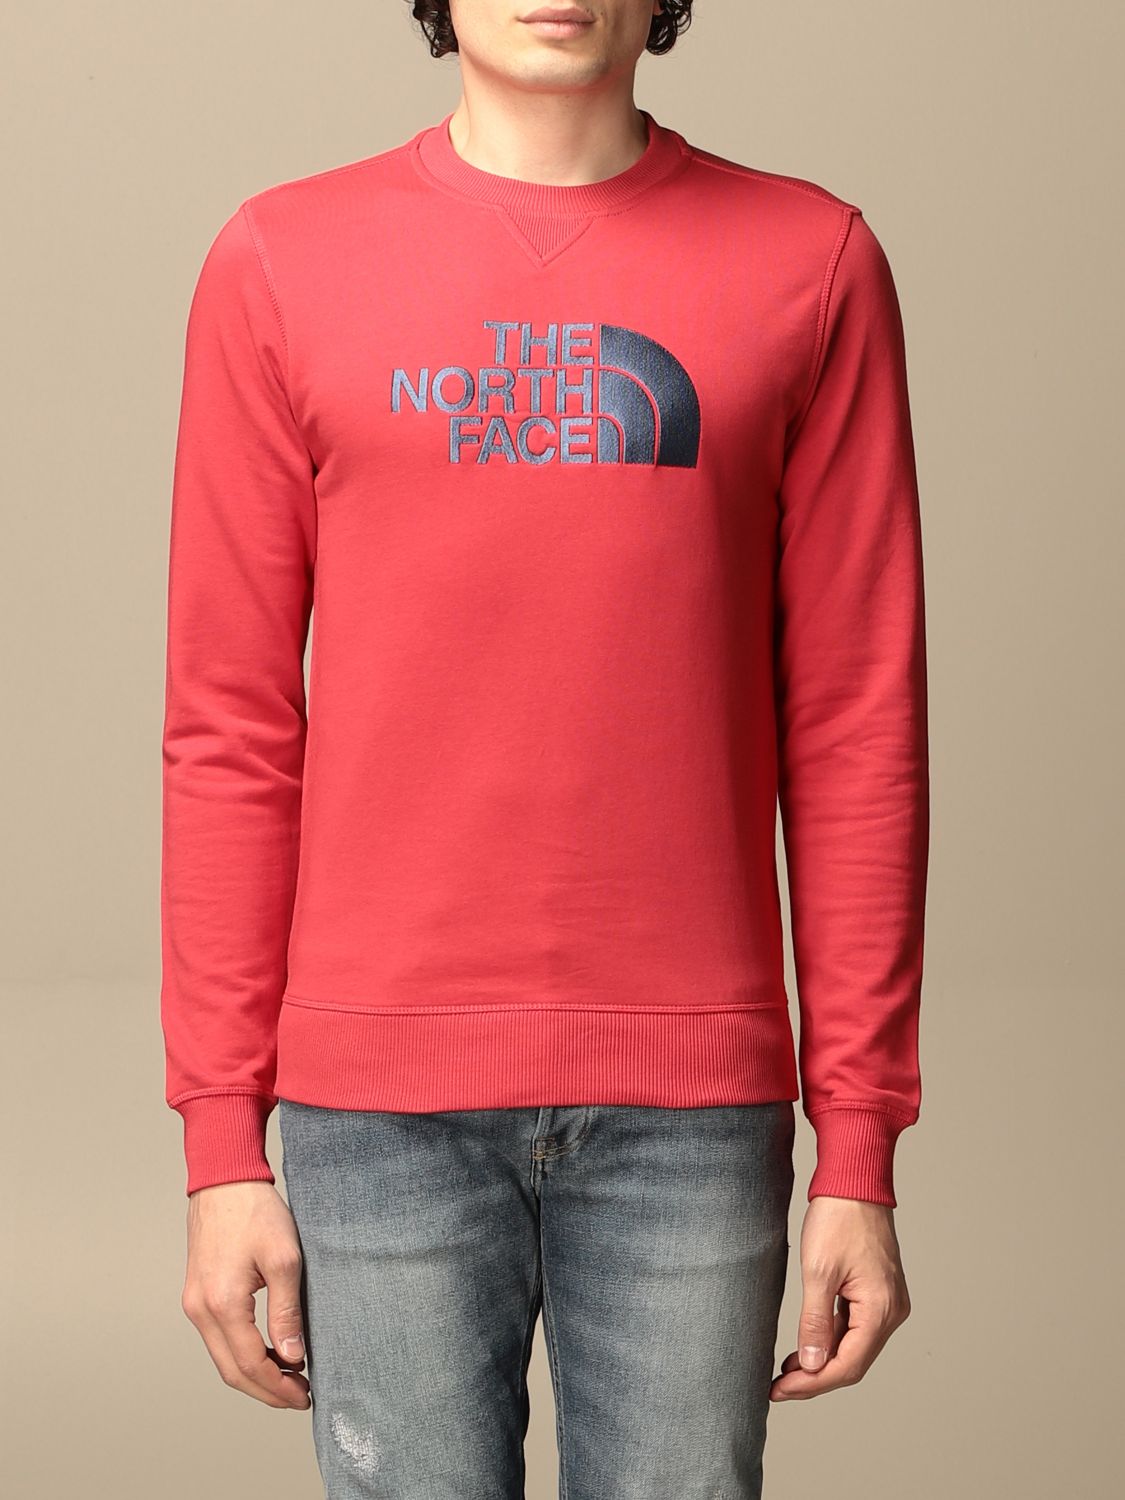 Sweatshirt The North Face: Sweatshirt homme The North Face rouge 1